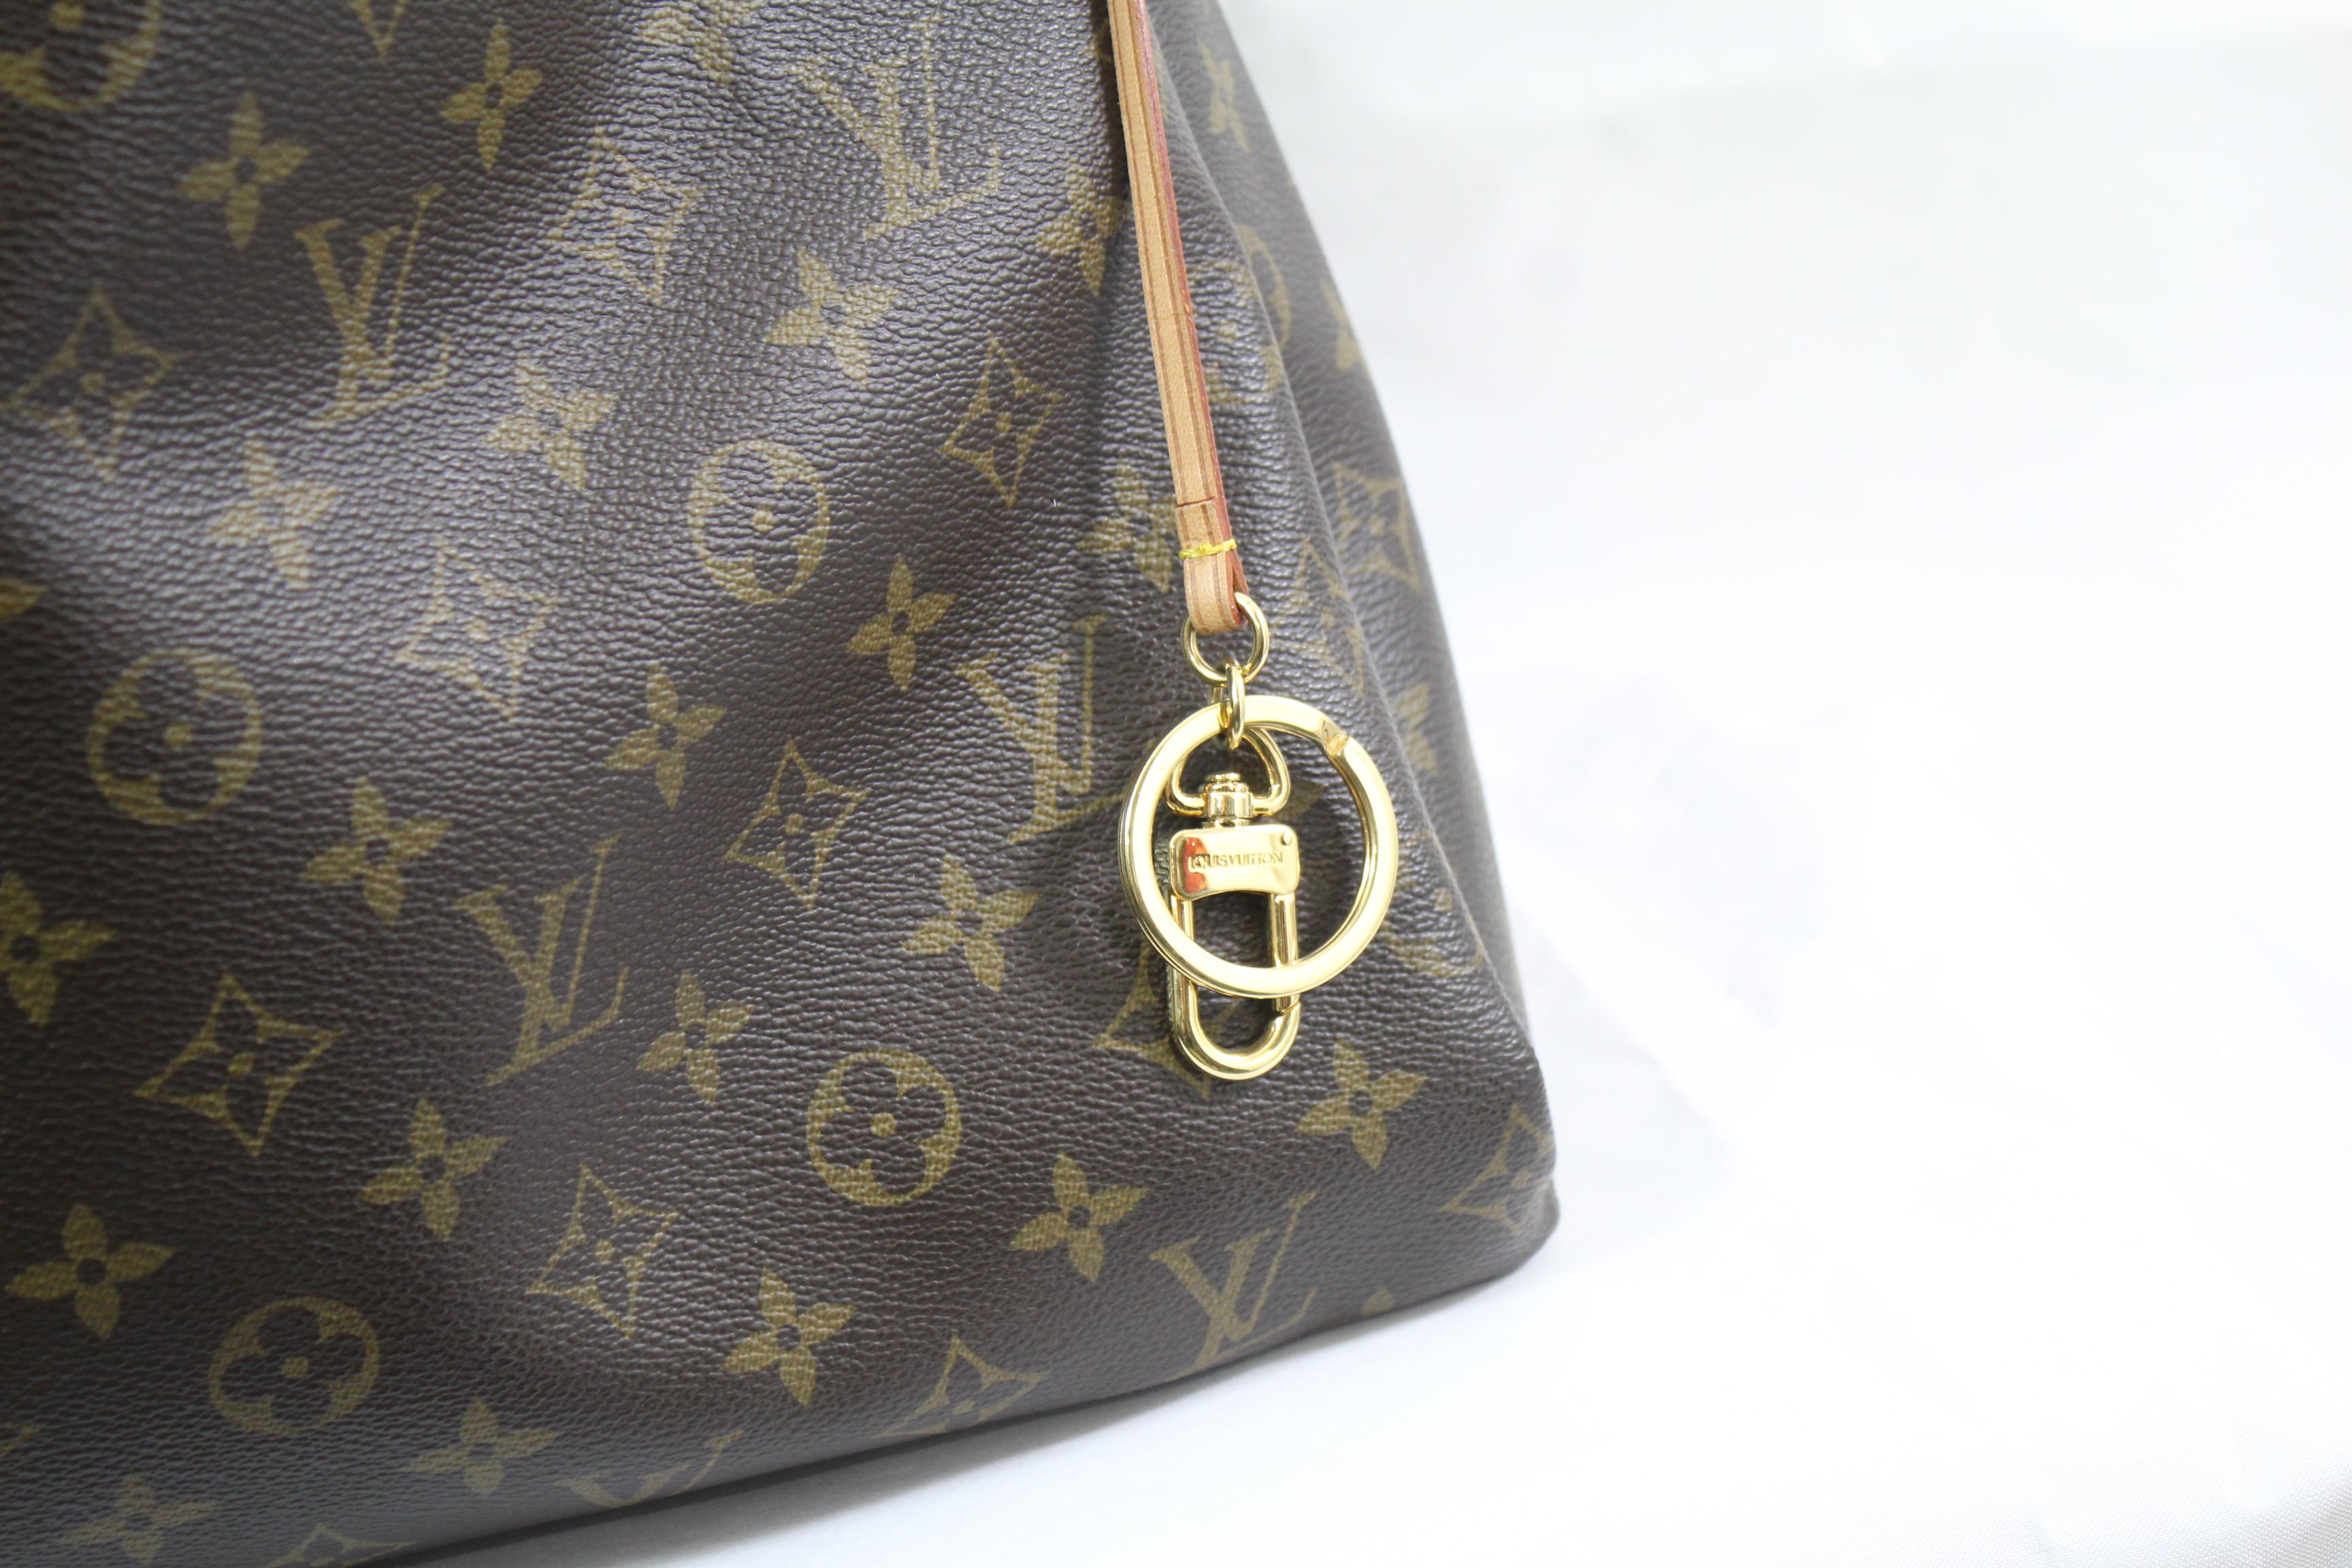 Lovely louis Vuitton Artsy Bag, an iconic bag from Louis Vuitton with its lovely handle.

Good condtion light signs of use.

16 x 12.6 x 7.5 inches 